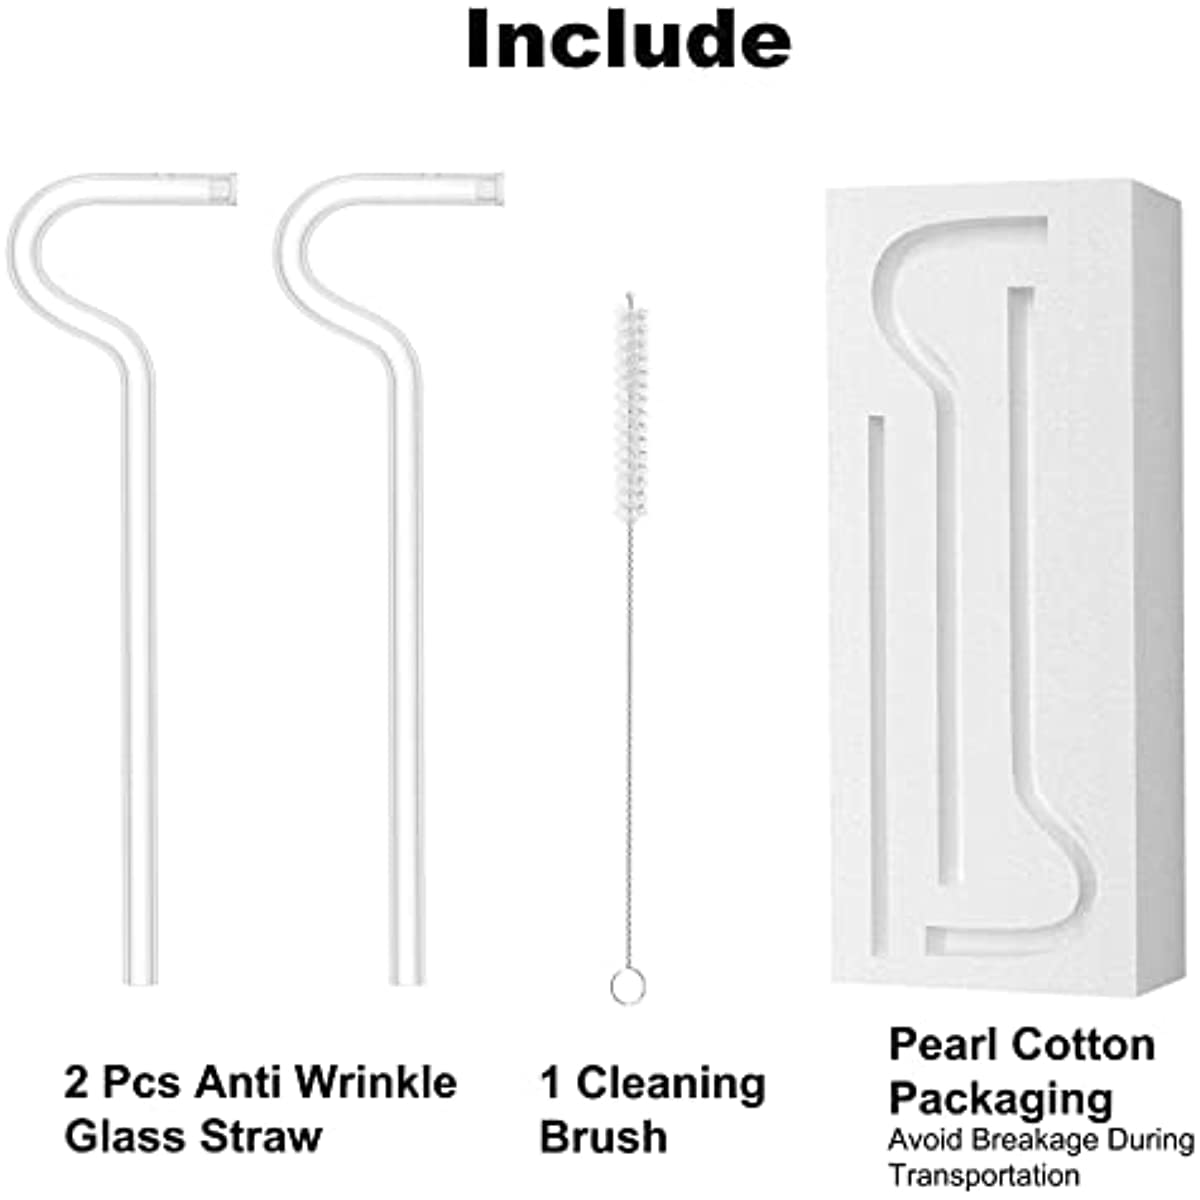 2pcs Anti Wrinkle Straw, Reusable Glass Straw For Stanley Cup, Anti Wrinkle  Drinking Straw Curved, Lip Straw For Wrinkles, No Wrinkle Straws, Side  Sideways Straw Wrinkle Free, Prevent Wrinkle Straw - Home